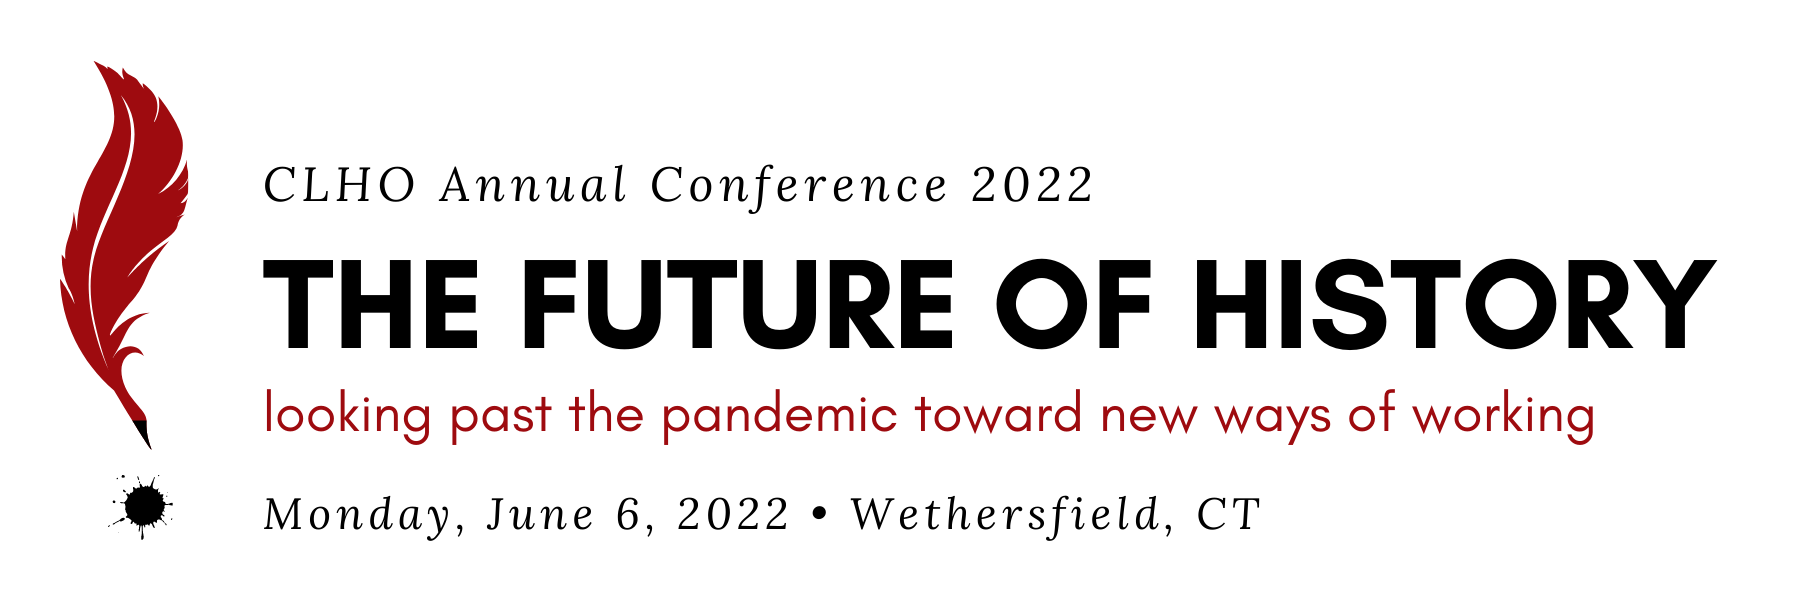 CLHO Annual Conference 2022, The Future of History: Looking Past the Pandemic Toward New Ways of Working, Monday, June 6, 2022, Wethersfield, CT